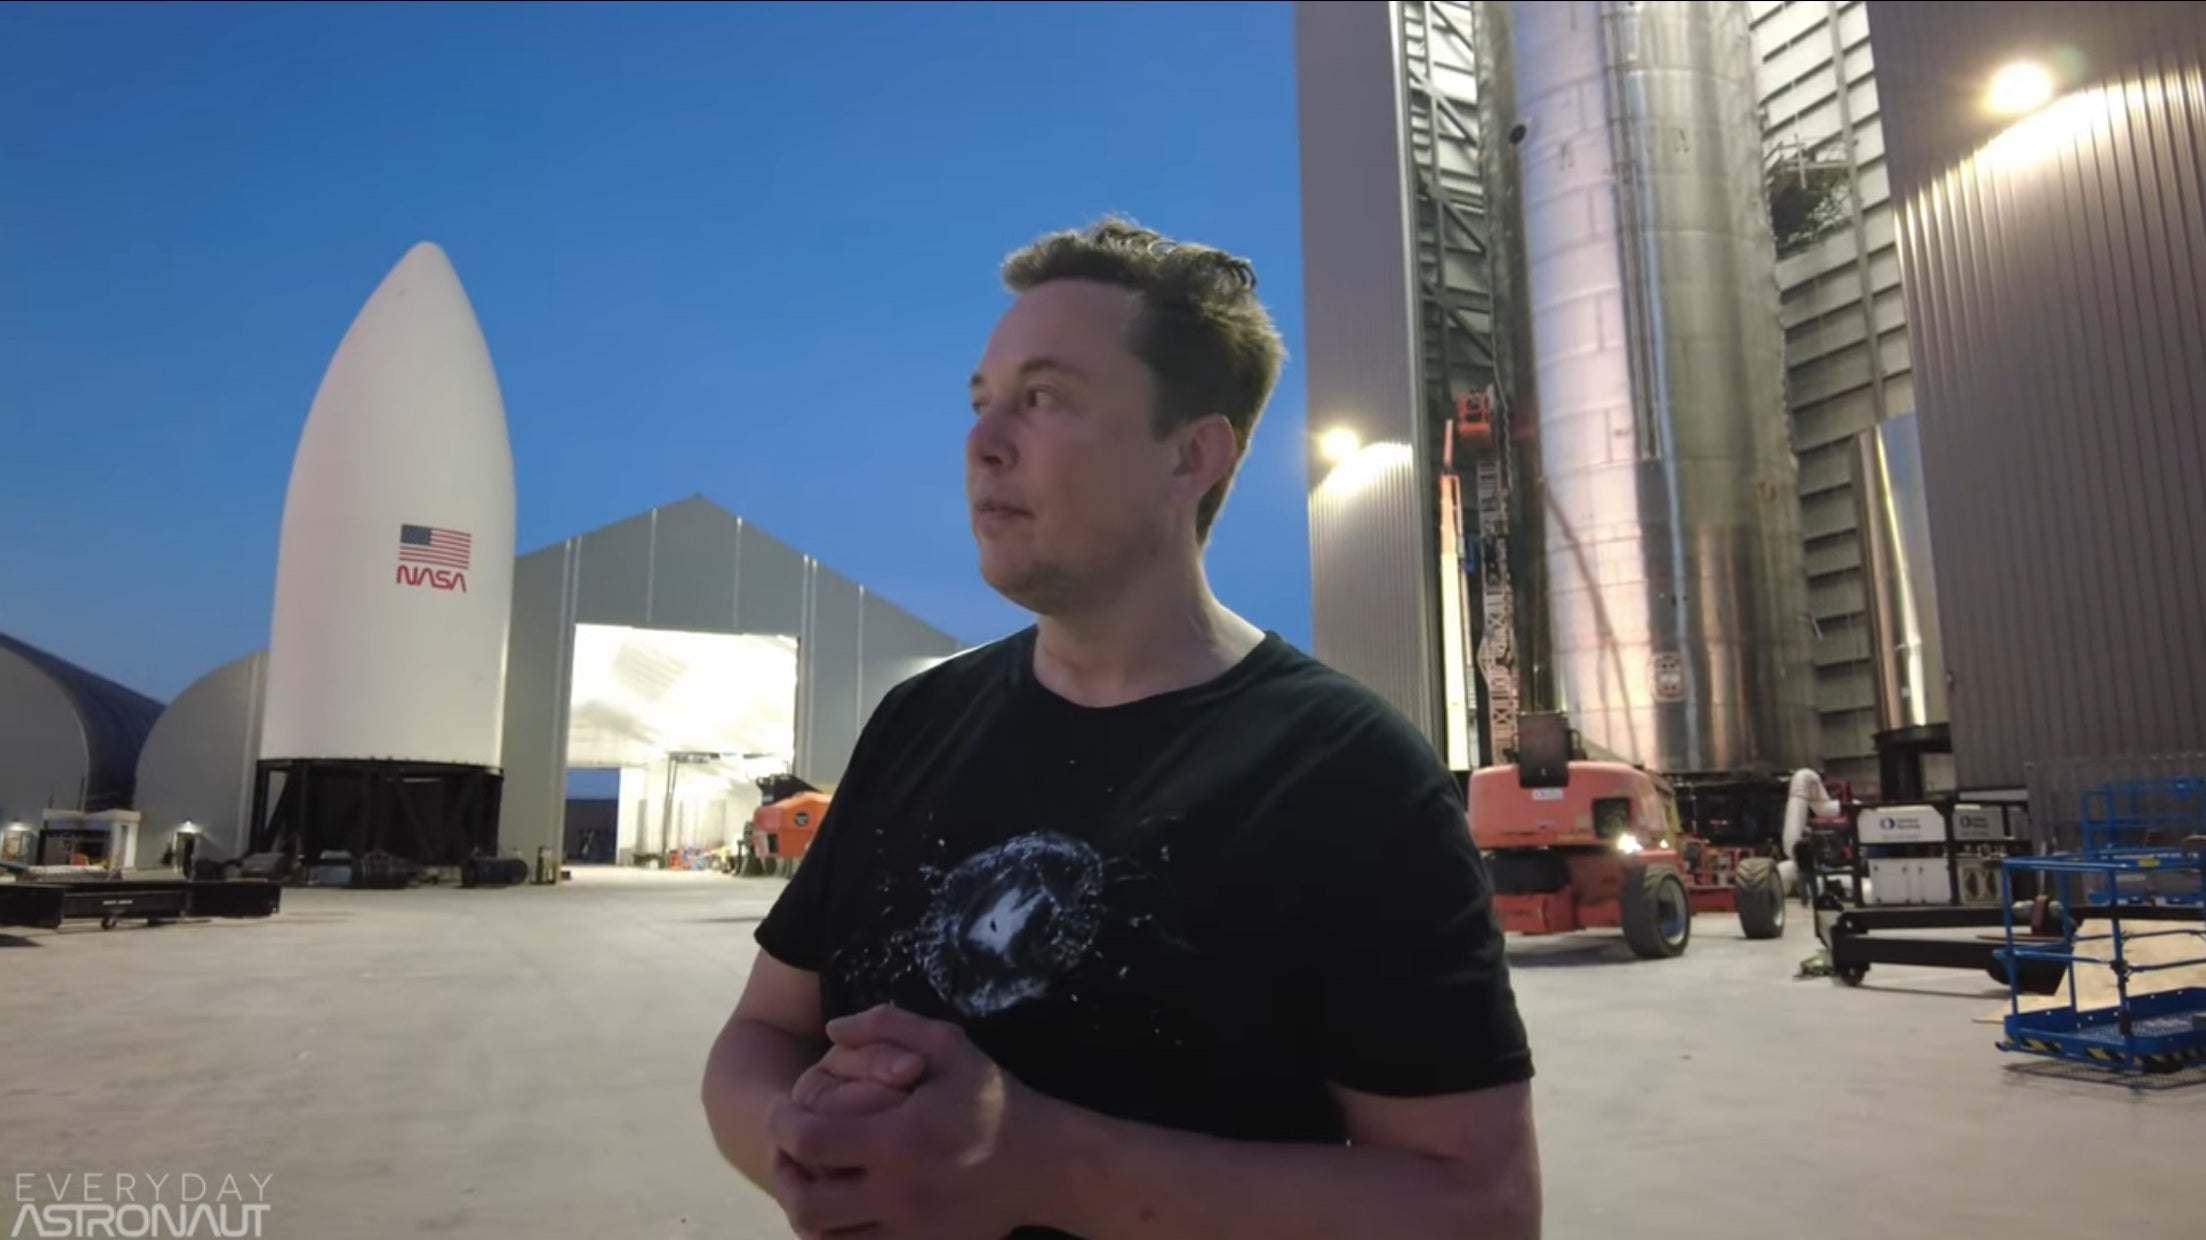 Elon Musk Gives Everyday Astronaut A Tour Of The SpaceX Starbase Factory [VIDEO]